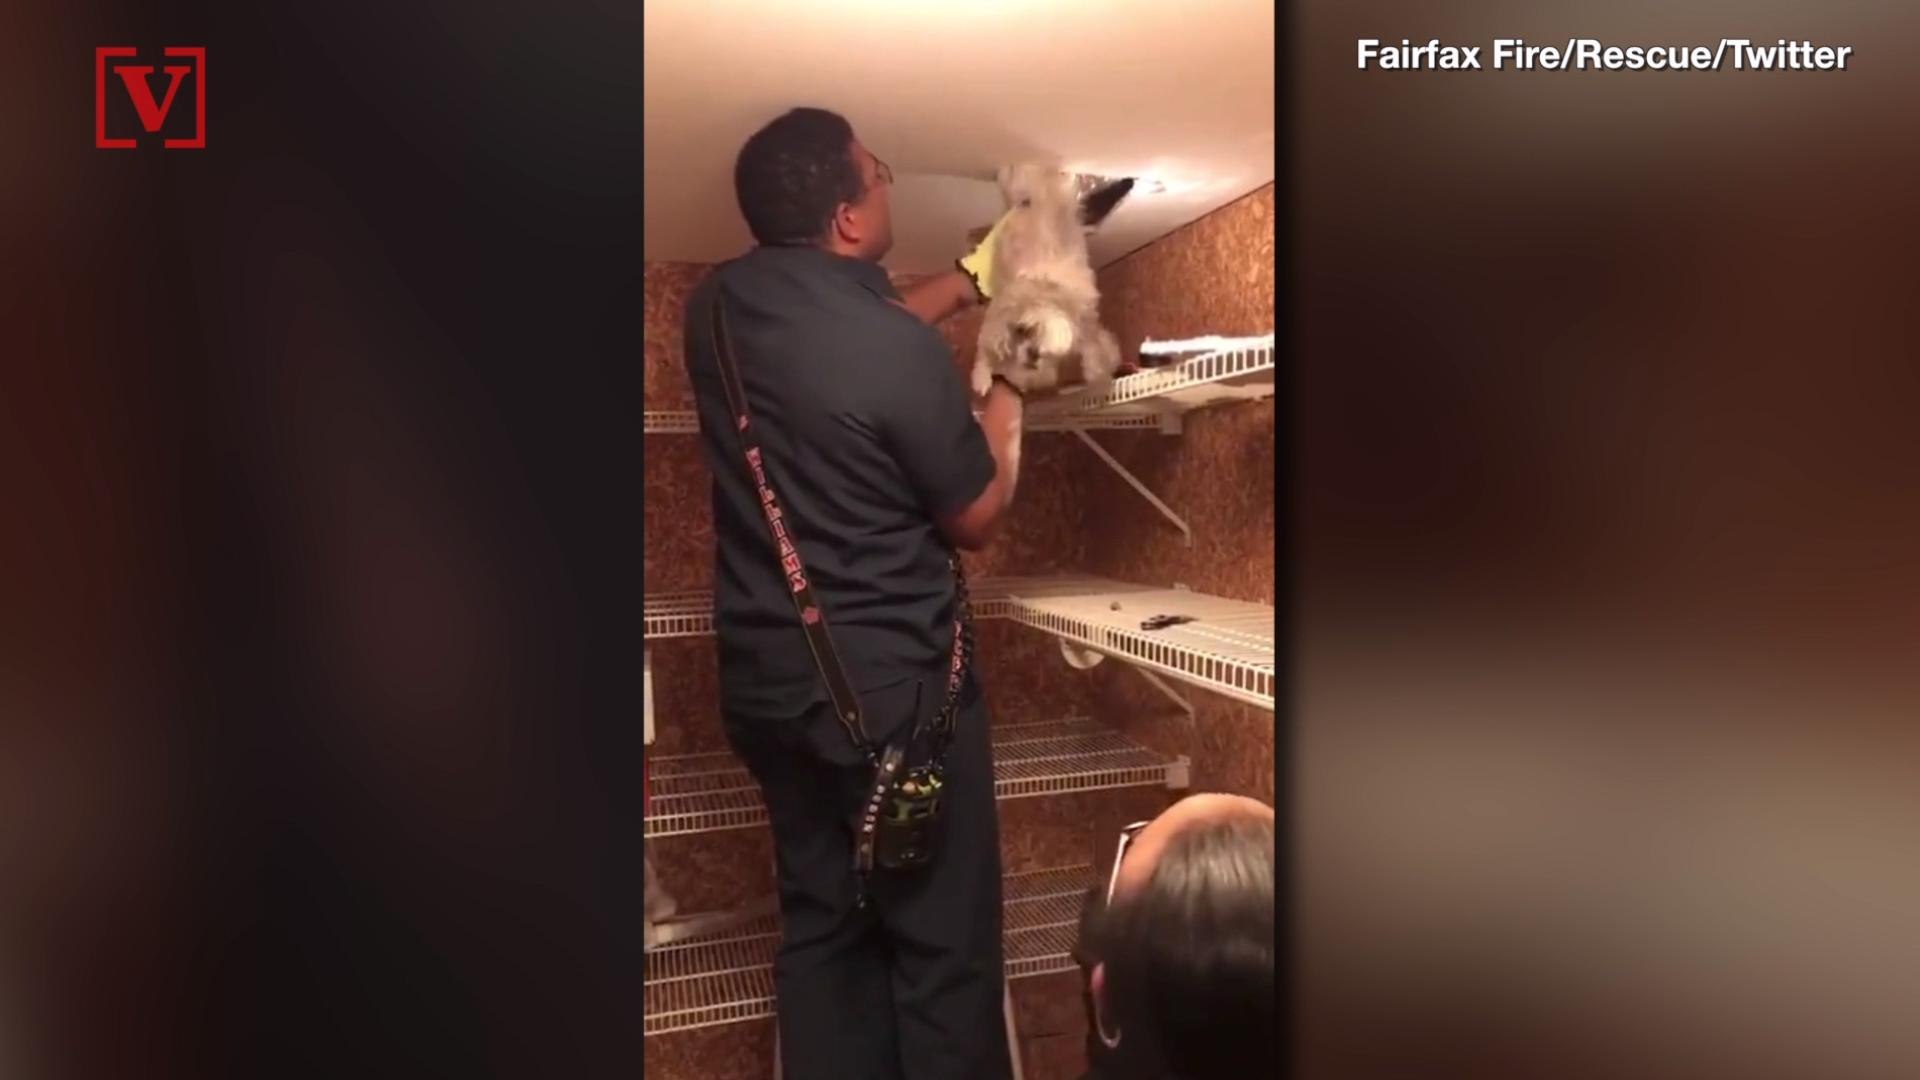 ⁣Watch as Firefighters Rescue Small Dog That Got Stuck in Ceiling Duct